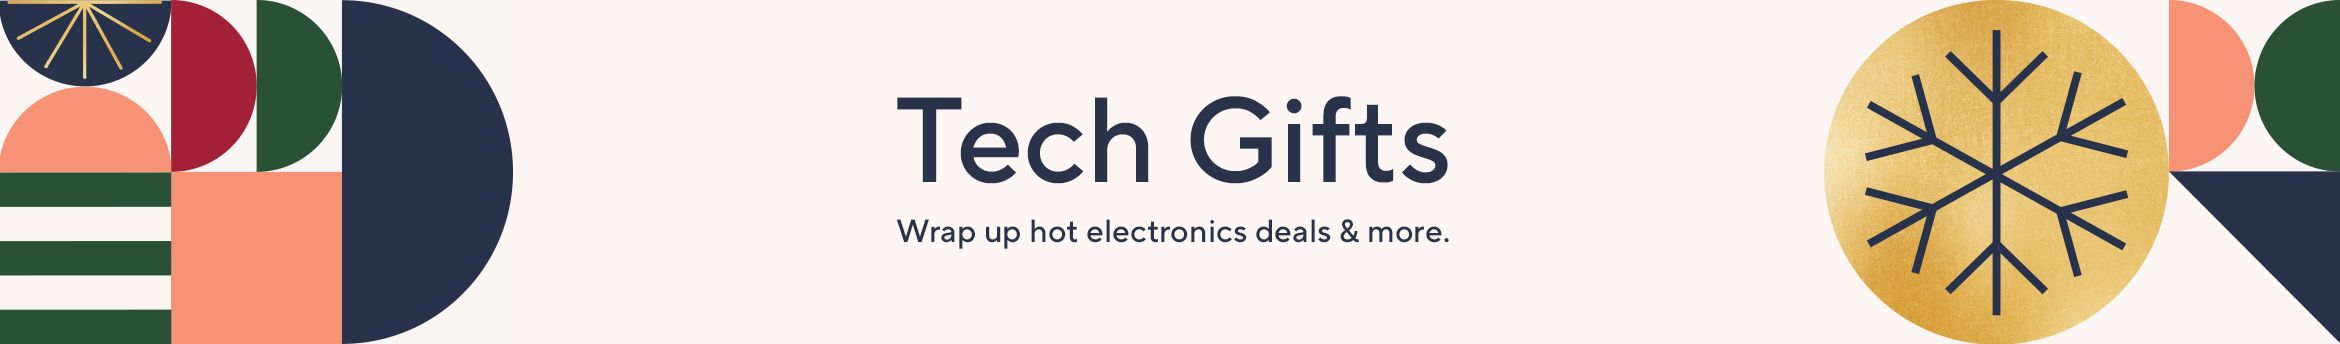 Tech Gifts. Wrap up hot electronics deals & more.